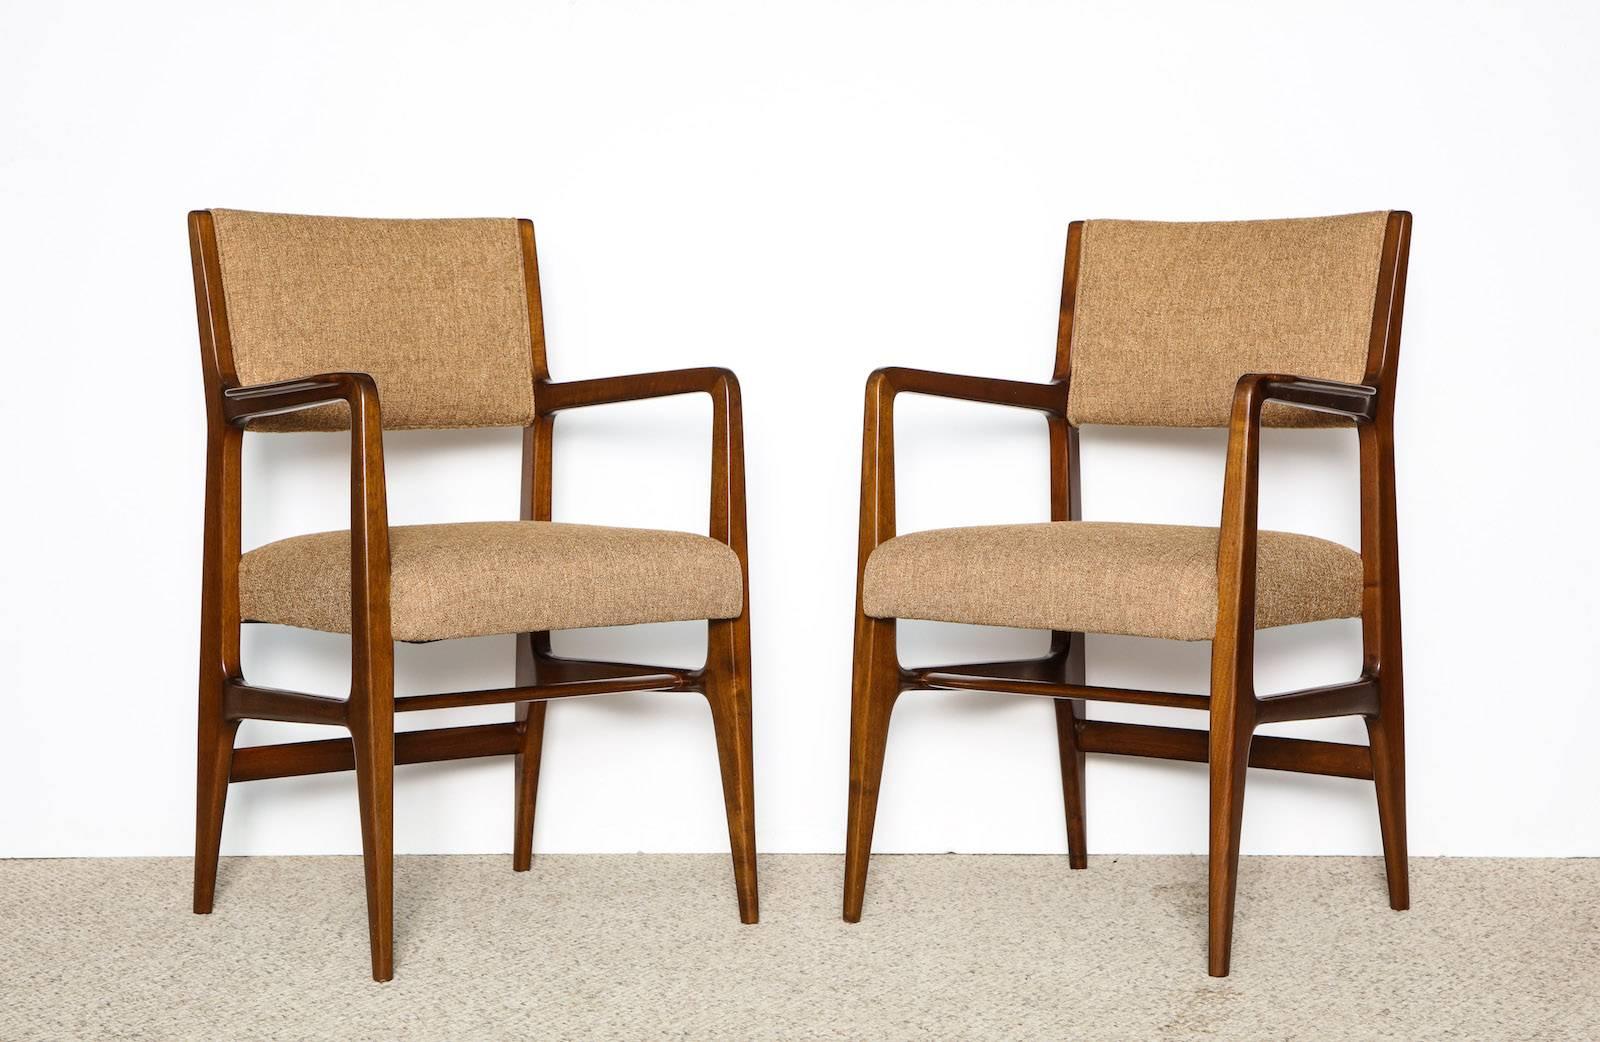 Rare pair of armchairs by Gio Ponti for M. Singer & Sons.
Mahogany frames with recently upholstered seat and back. Iconic Ponti forms in excellent condition. 
 